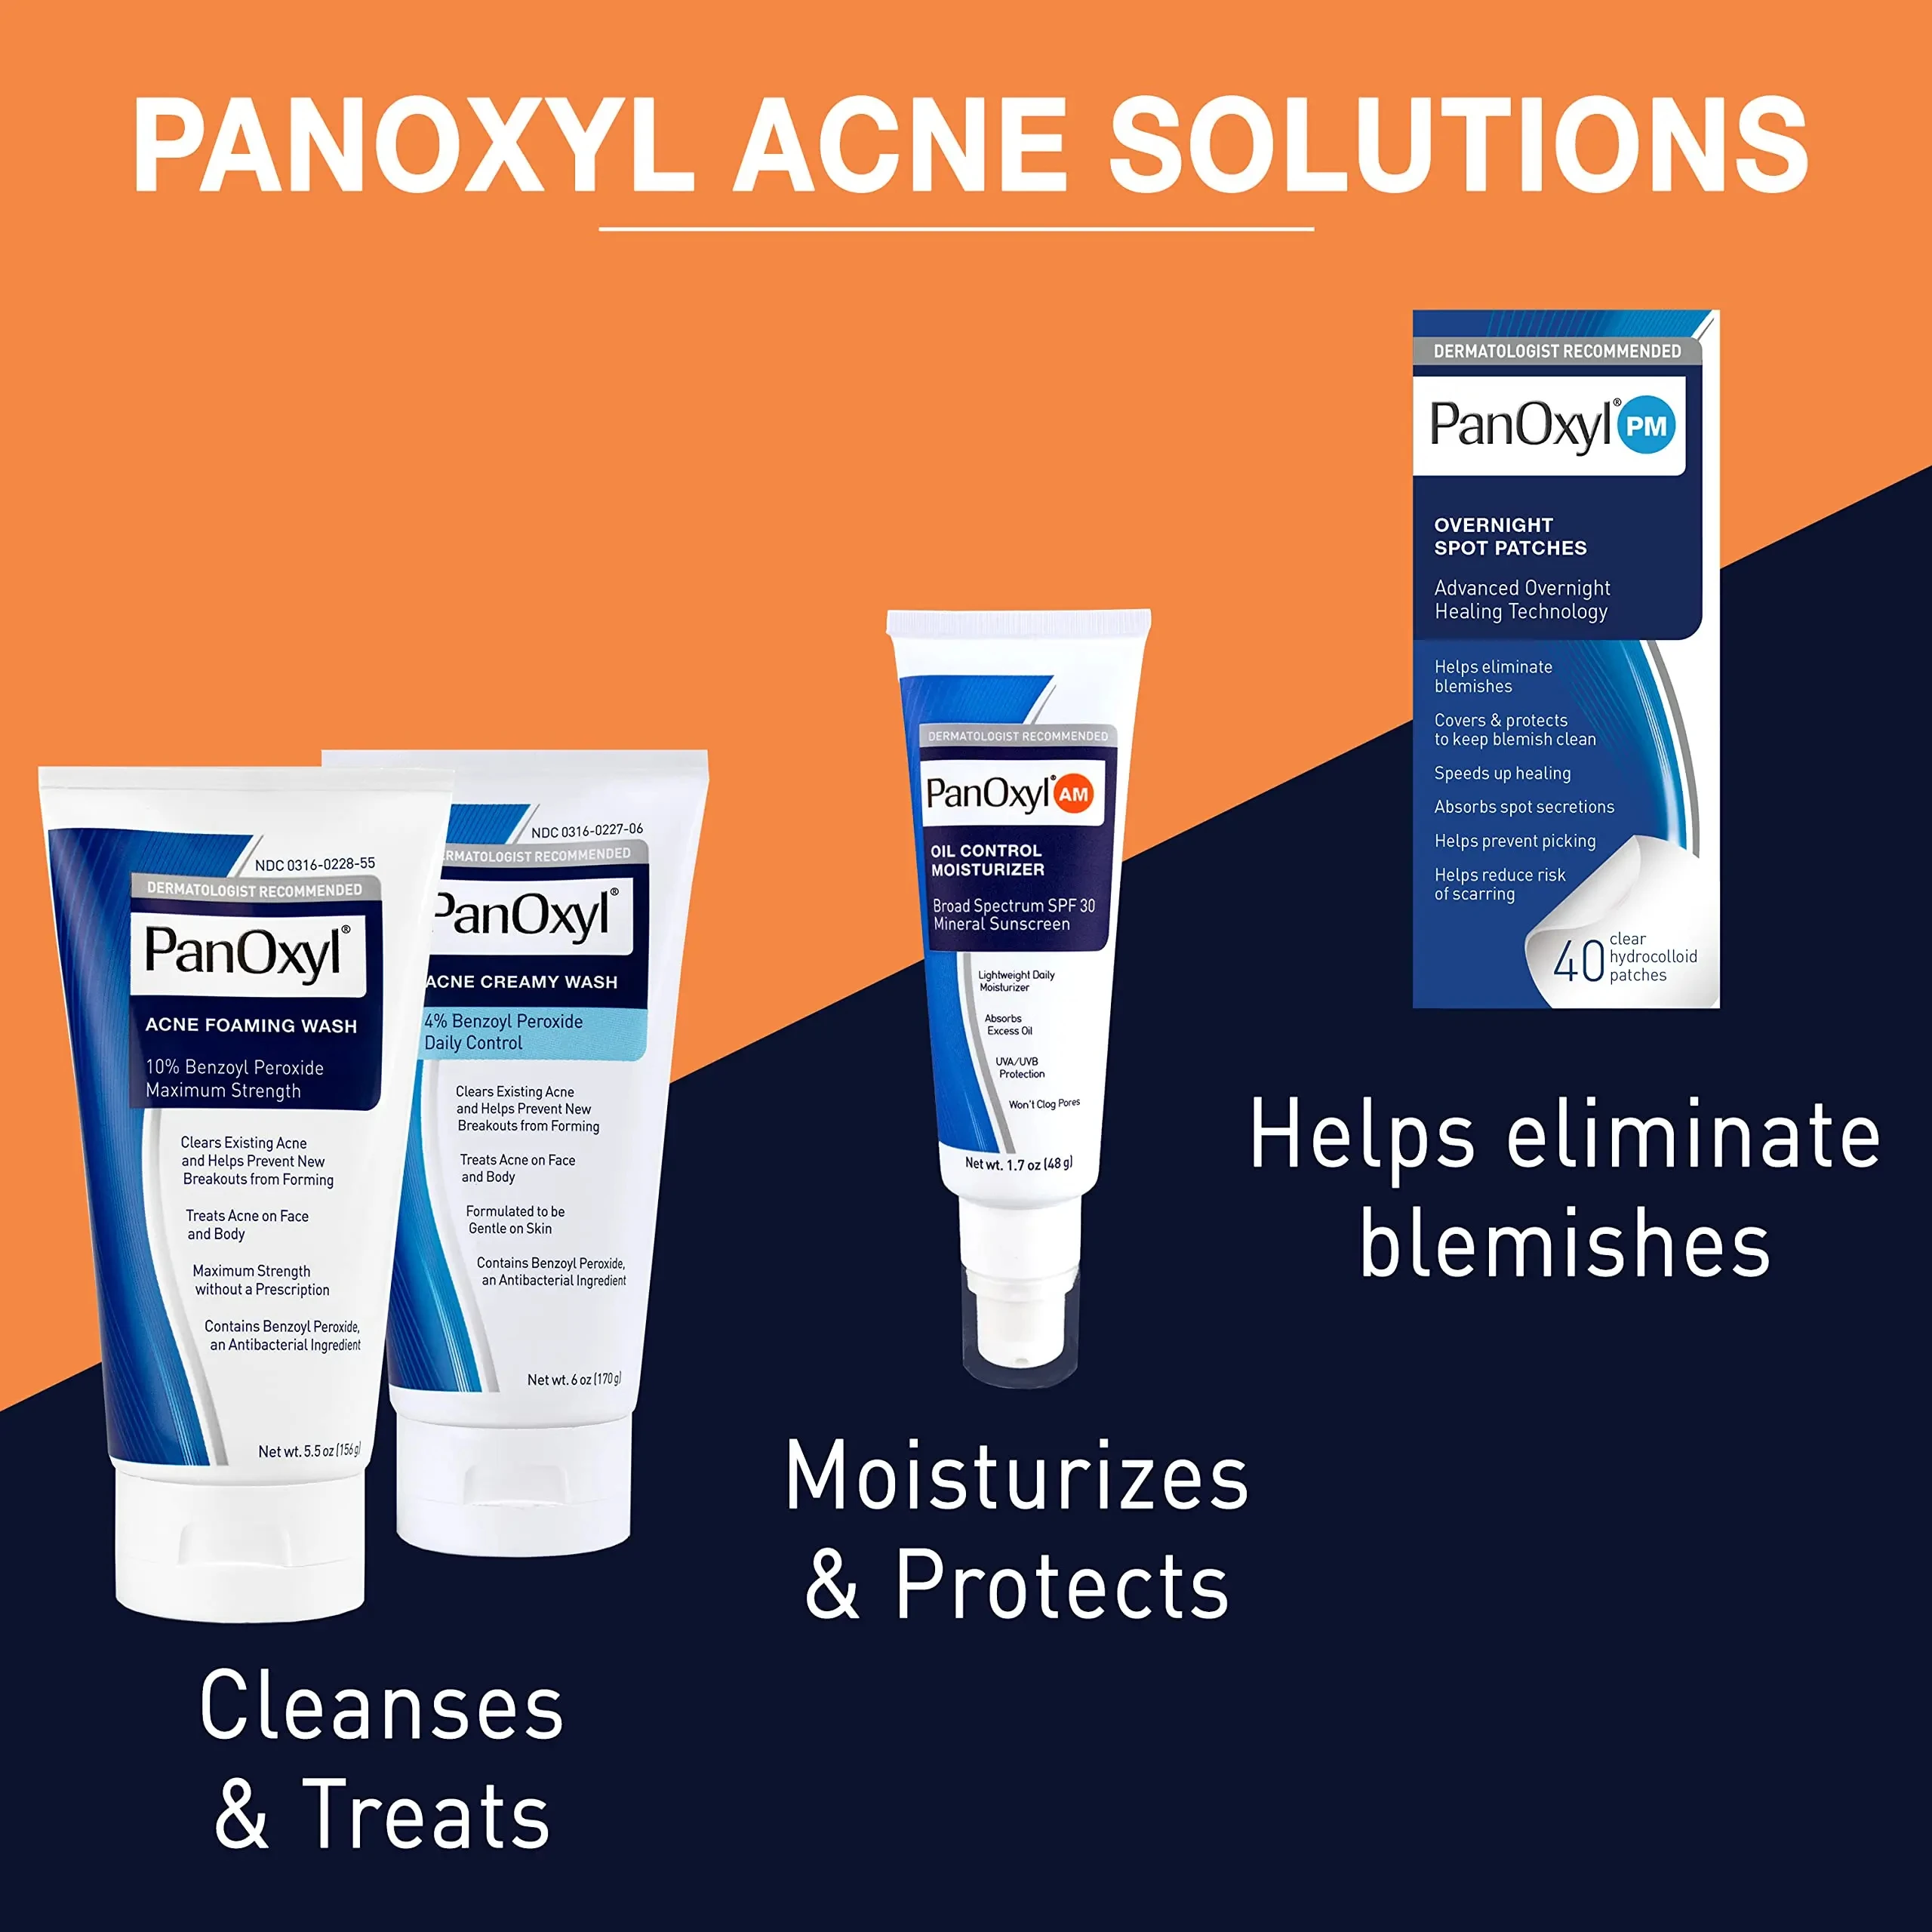 

PanOxyl Acne Facial Foaming Wash Benzoyl Peroxide 10%/4% Maximum Strength Antimicrobial Cleanse and Unclog pores Deep Skin Care